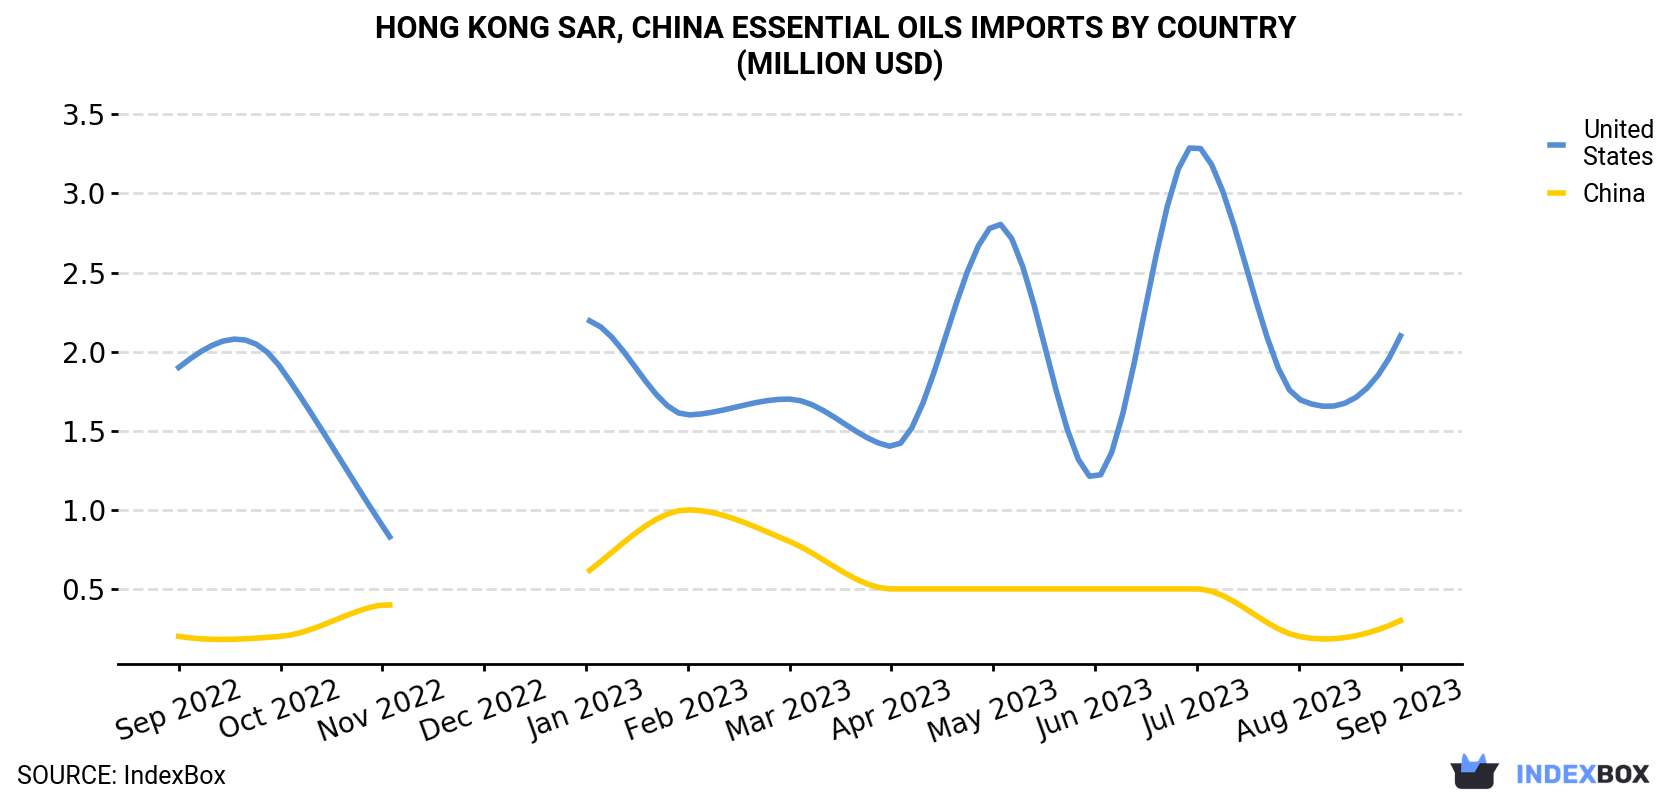 Hong Kong Essential Oils Imports By Country (Million USD)